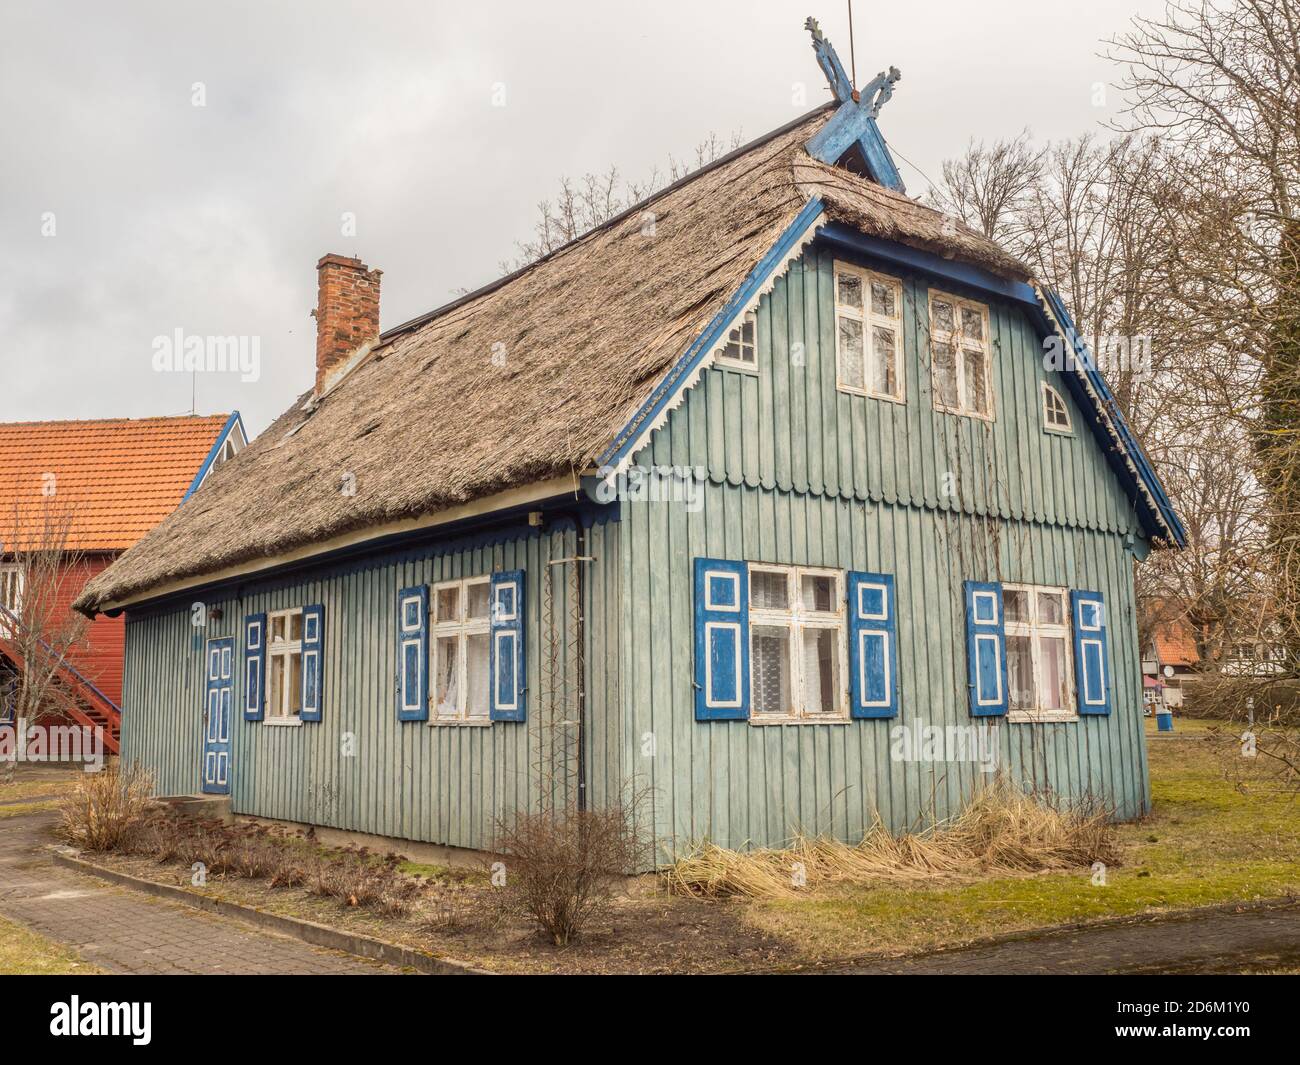 Nida, Lithuania - April 06, 2018: Blue wooden house on the headland, National Park Curonian Spit, A nature reserve with forests and a long sandy coast Stock Photo